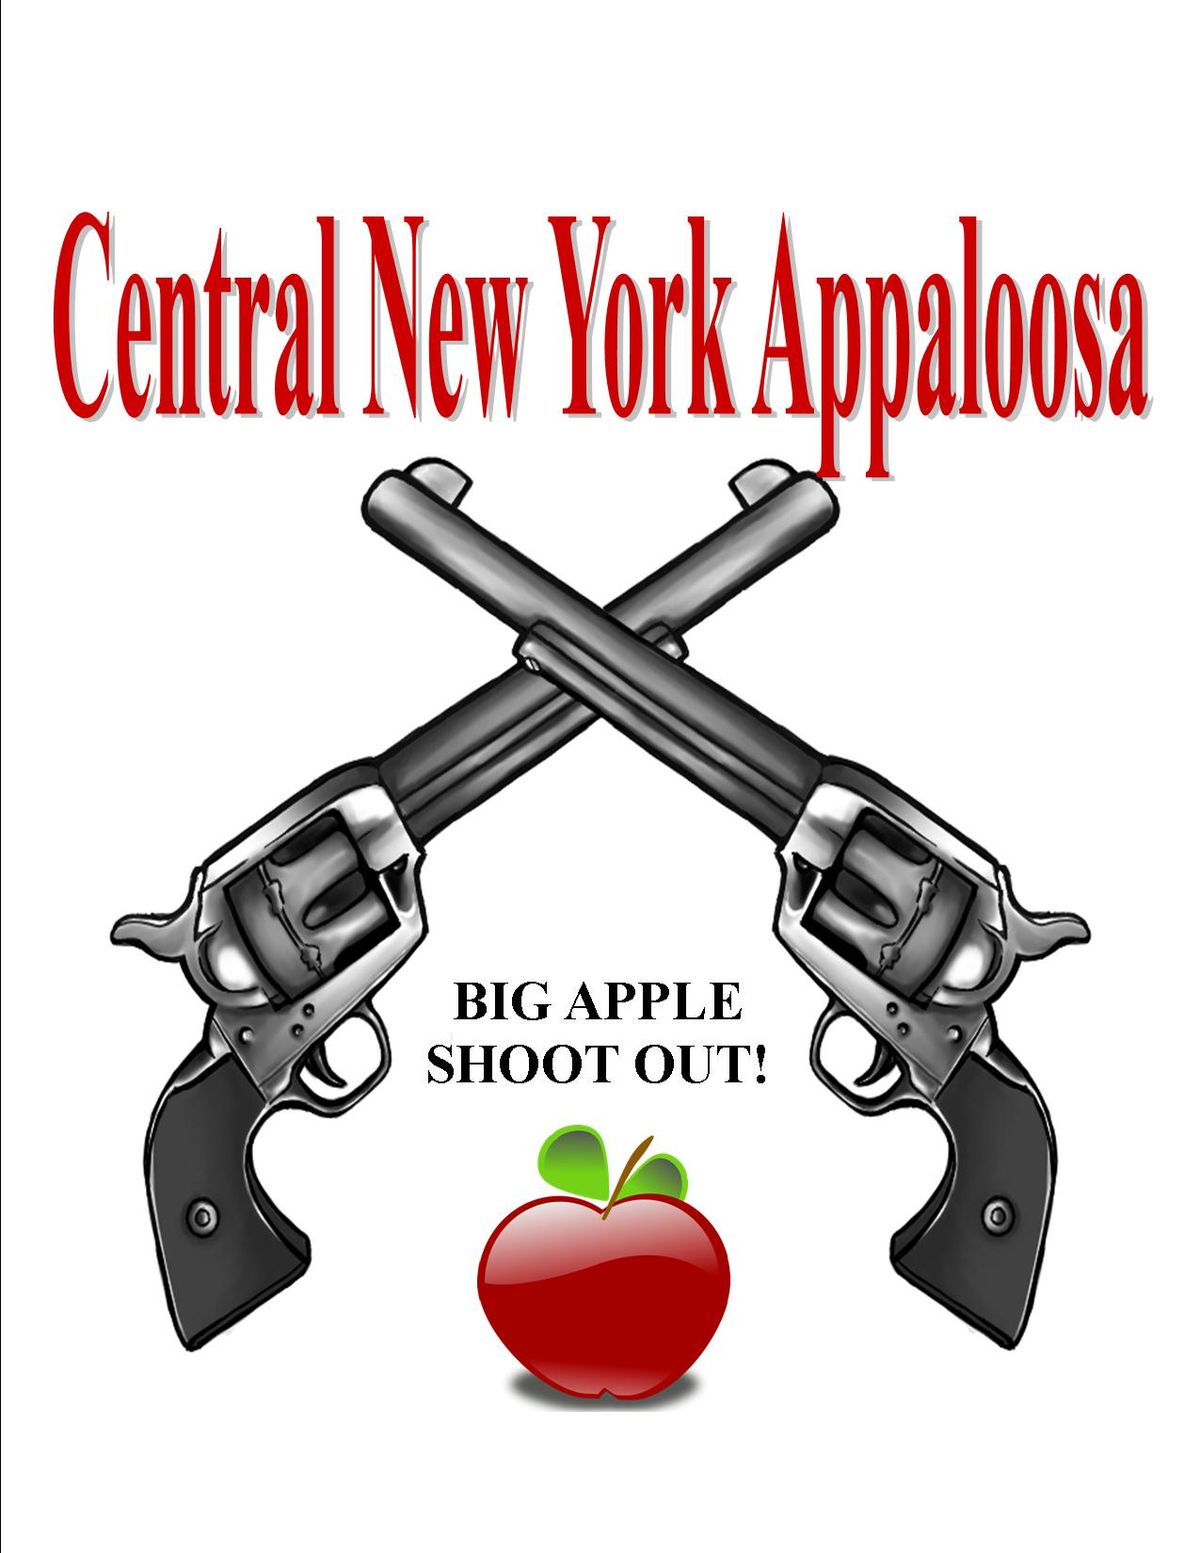 Big Apple Shoot Out!